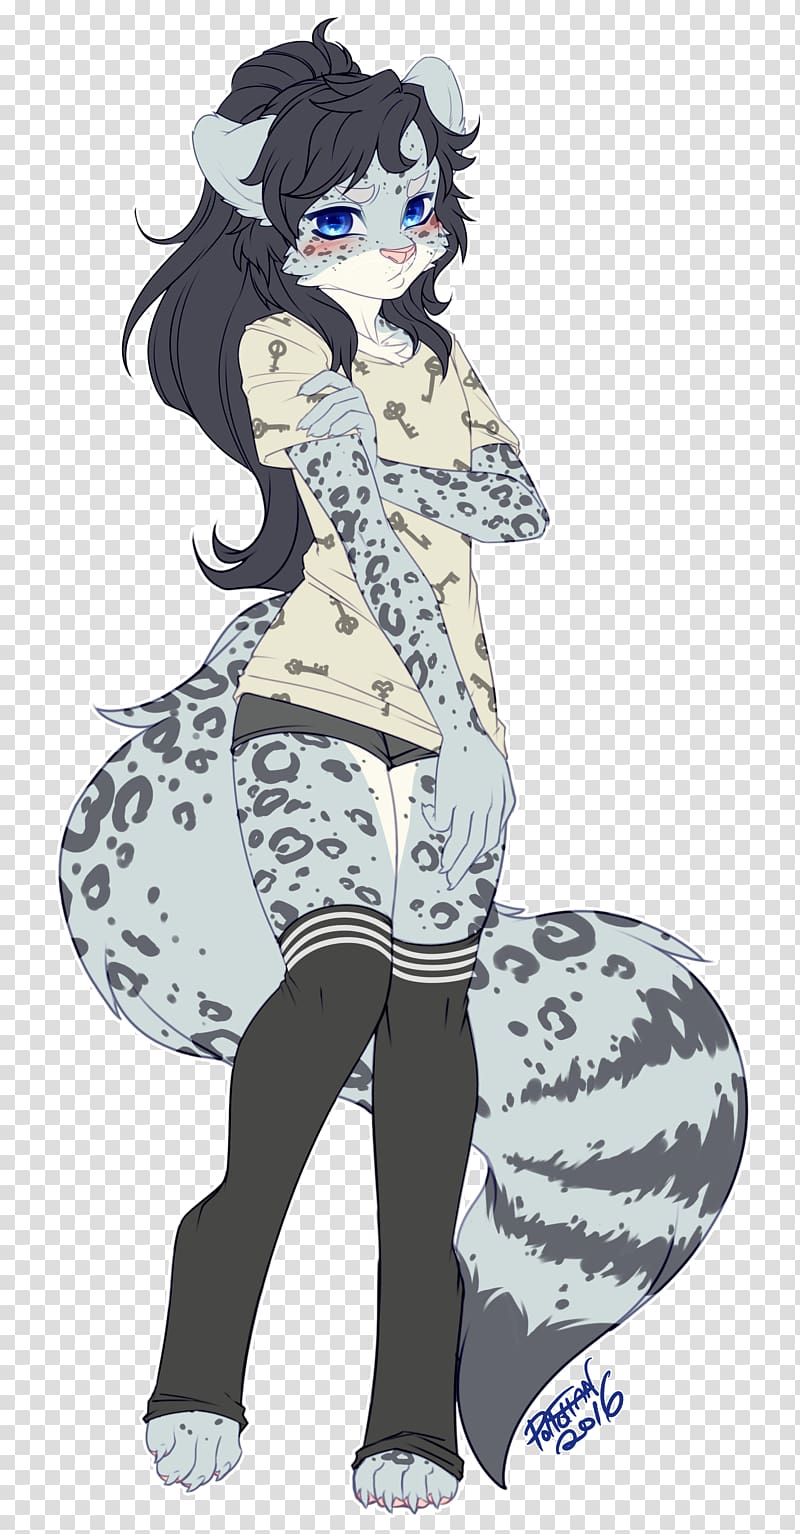 Furry fandom Drawing Yiff Art, others transparent background PNG clipart